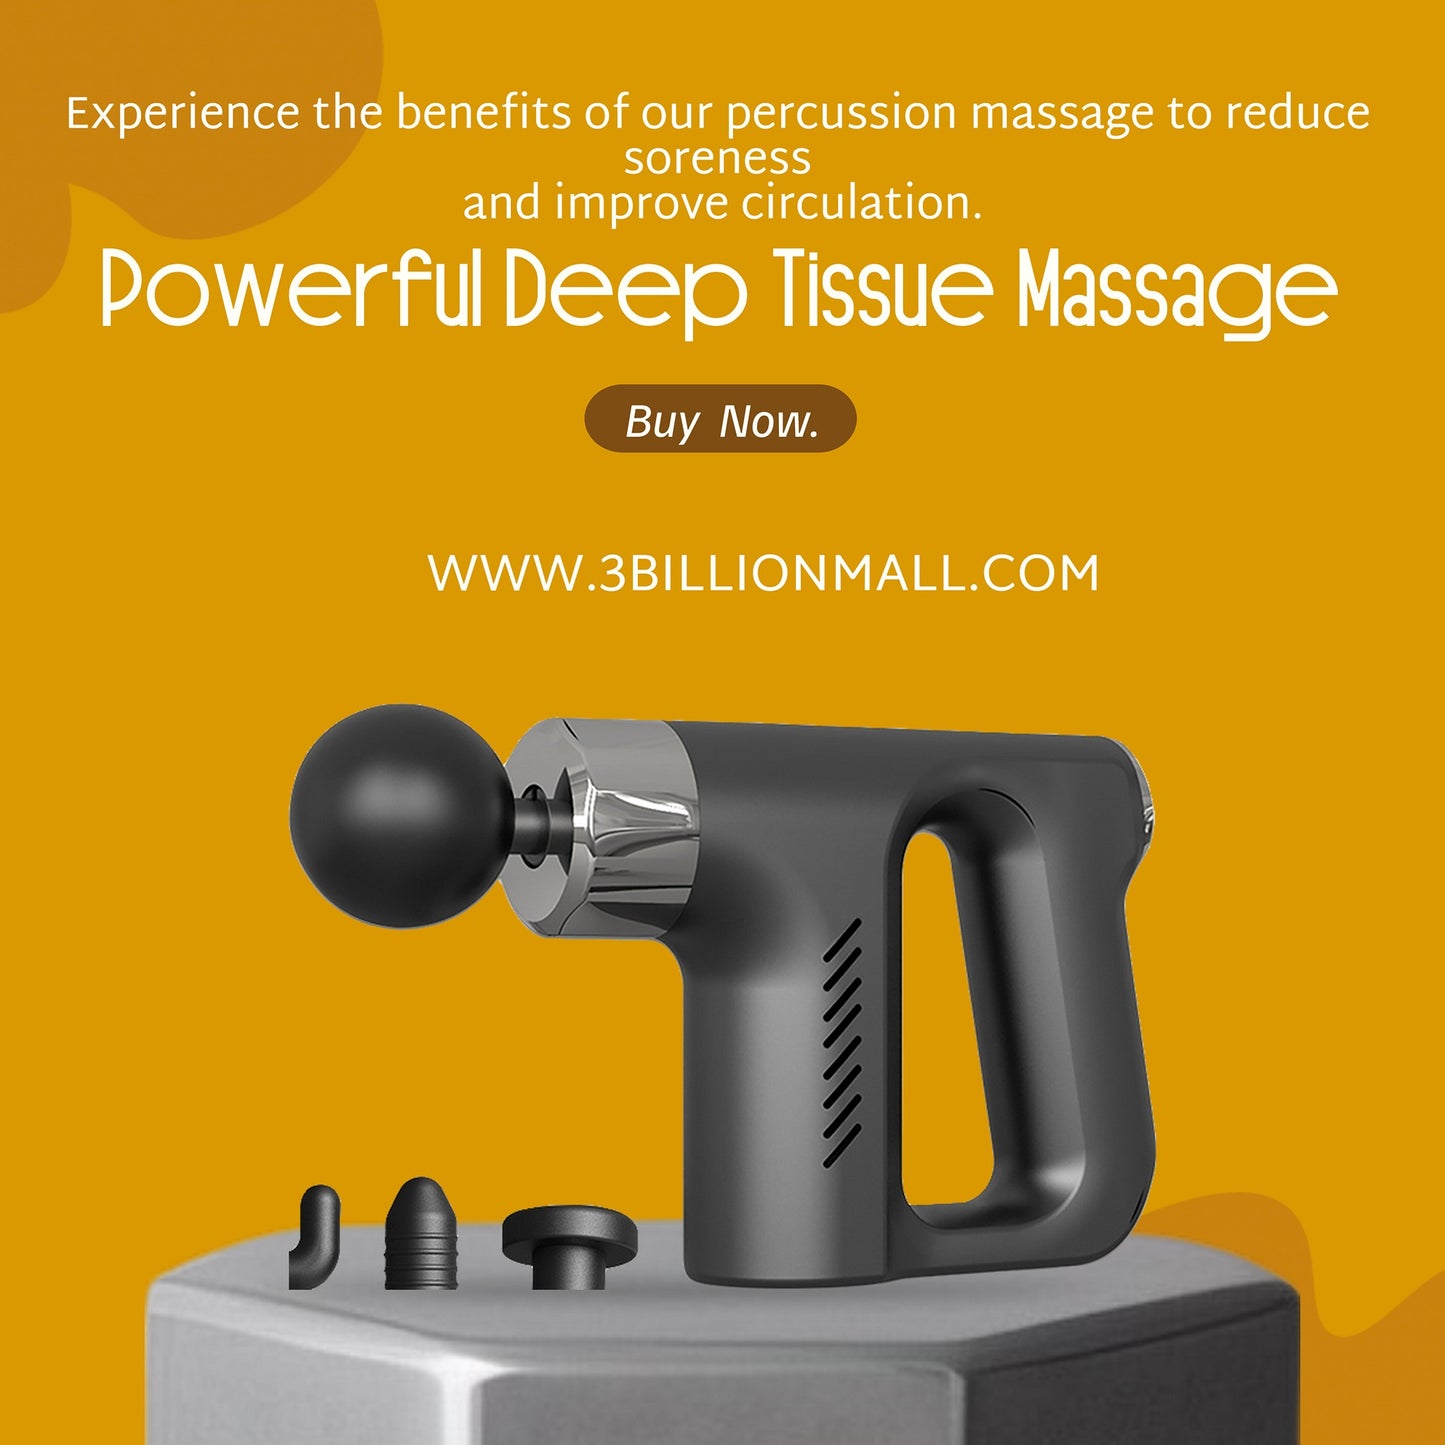 "Percussion Vibration Handheld Massager: Your Ultimate Solution for Relaxation and Pain Relief Across Body and Face."